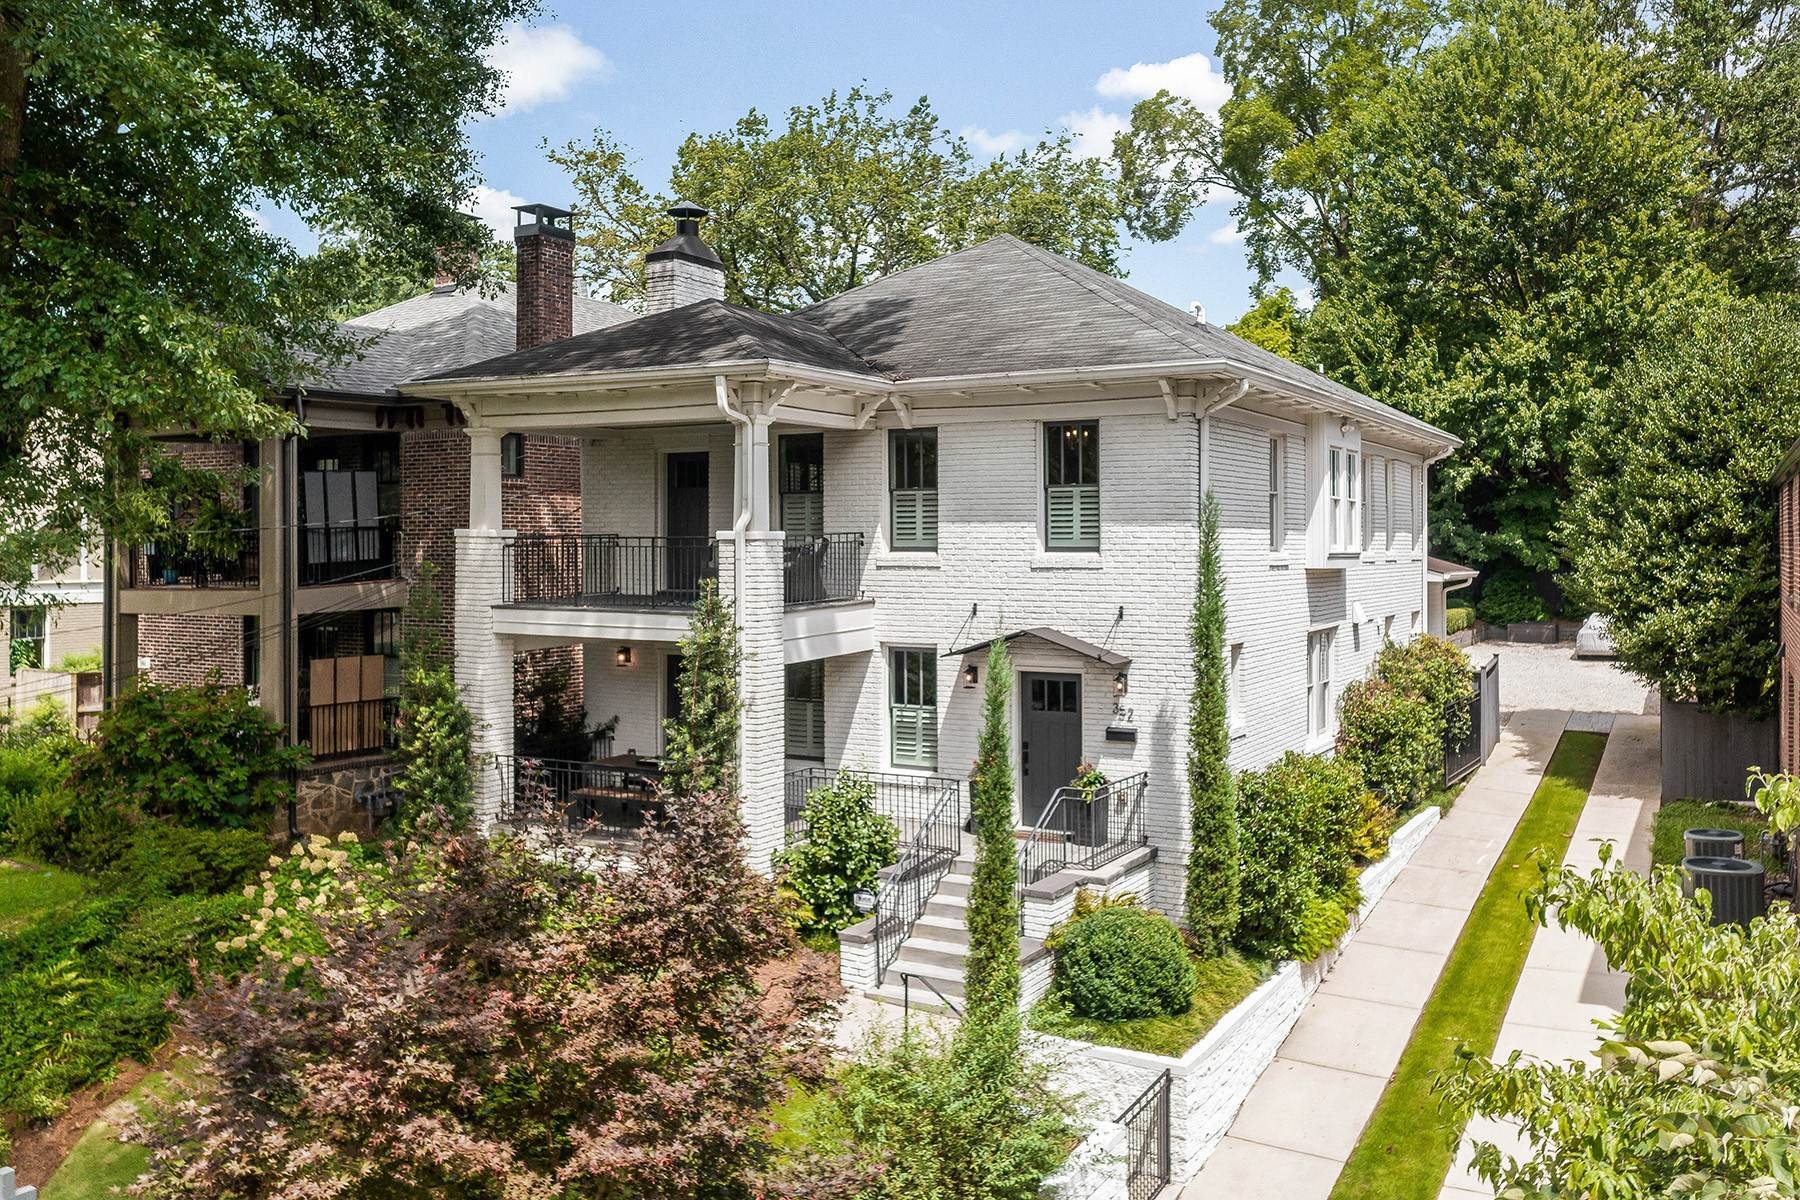 Property for Sale at All-Brick, South-Facing Home Sits High Above The Street In Midtown 352 8th Street NE Atlanta, Georgia 30309 United States